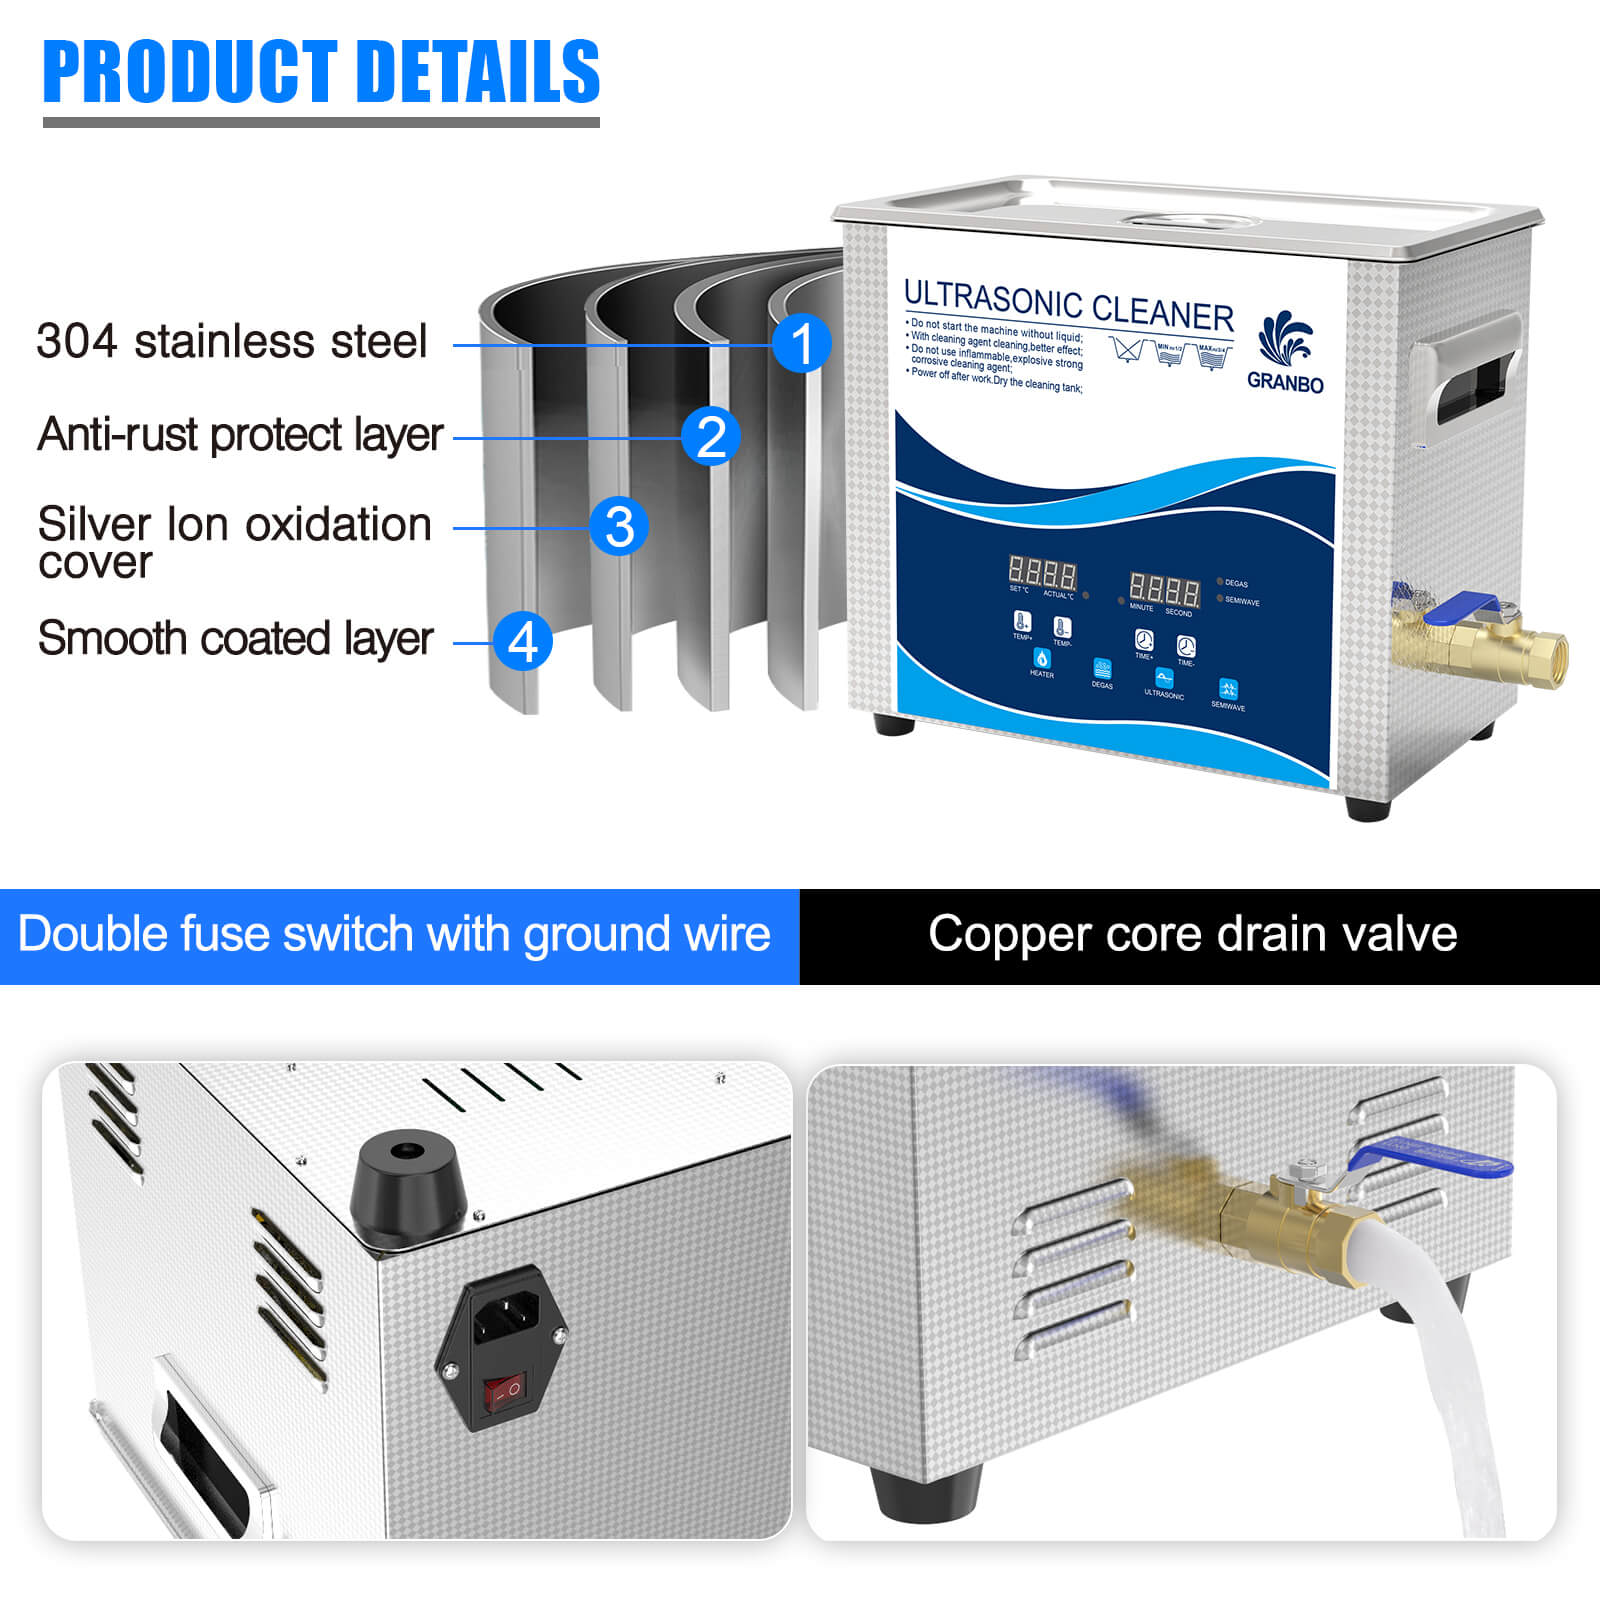 Dental ultrasonic cleaning machine can be used for denture and instrument cleaning